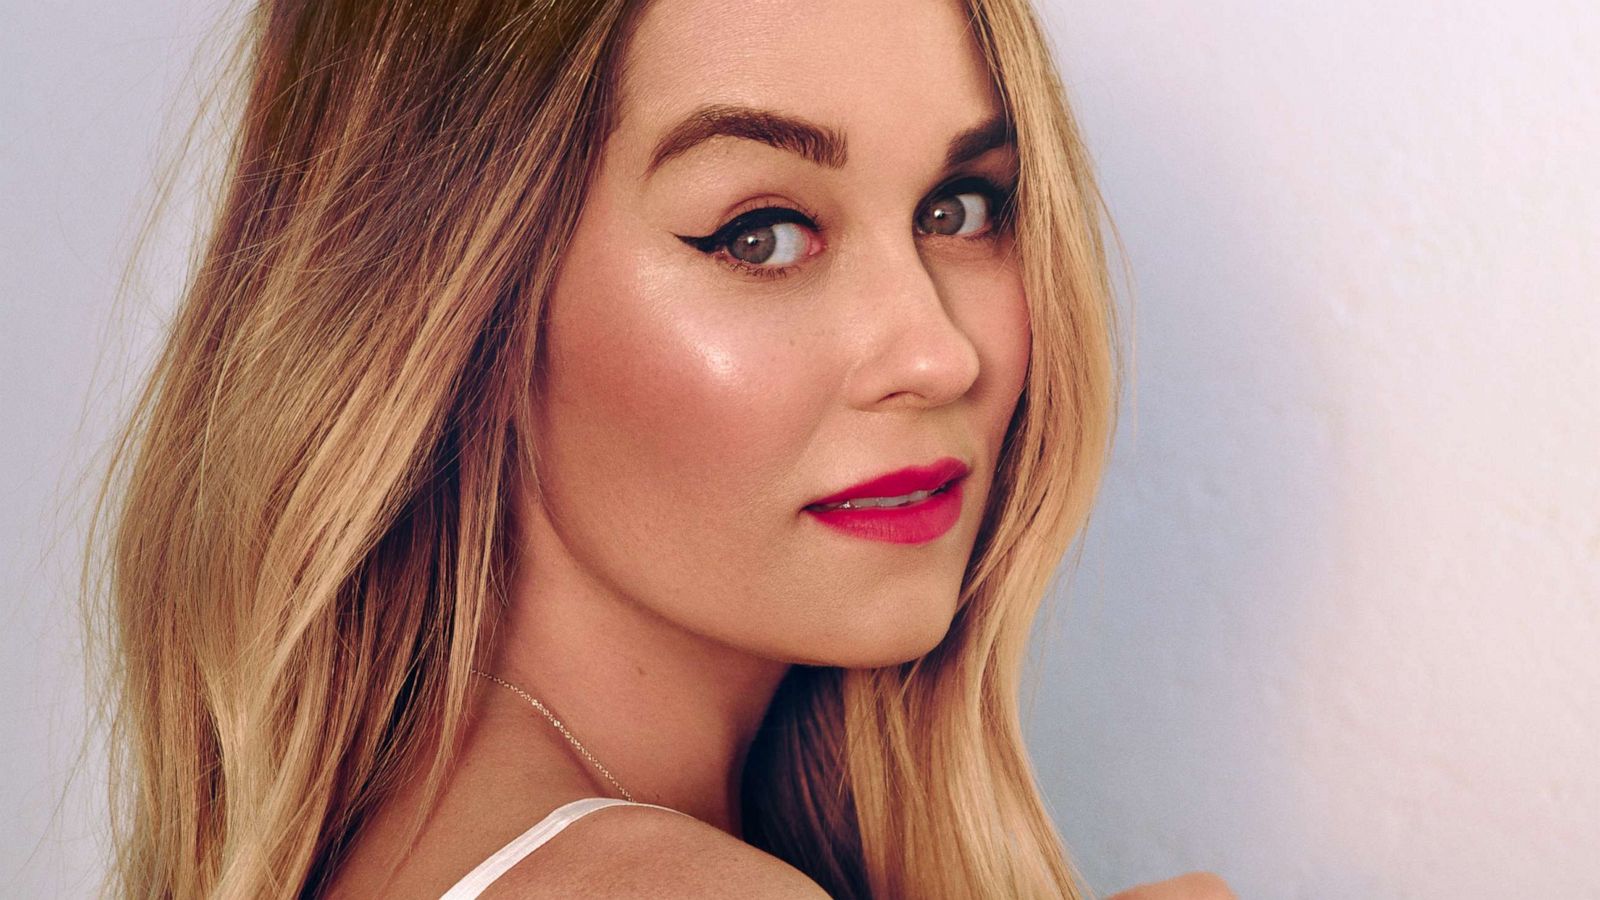 Lauren Conrad launches eco-friendly beauty collection - Good